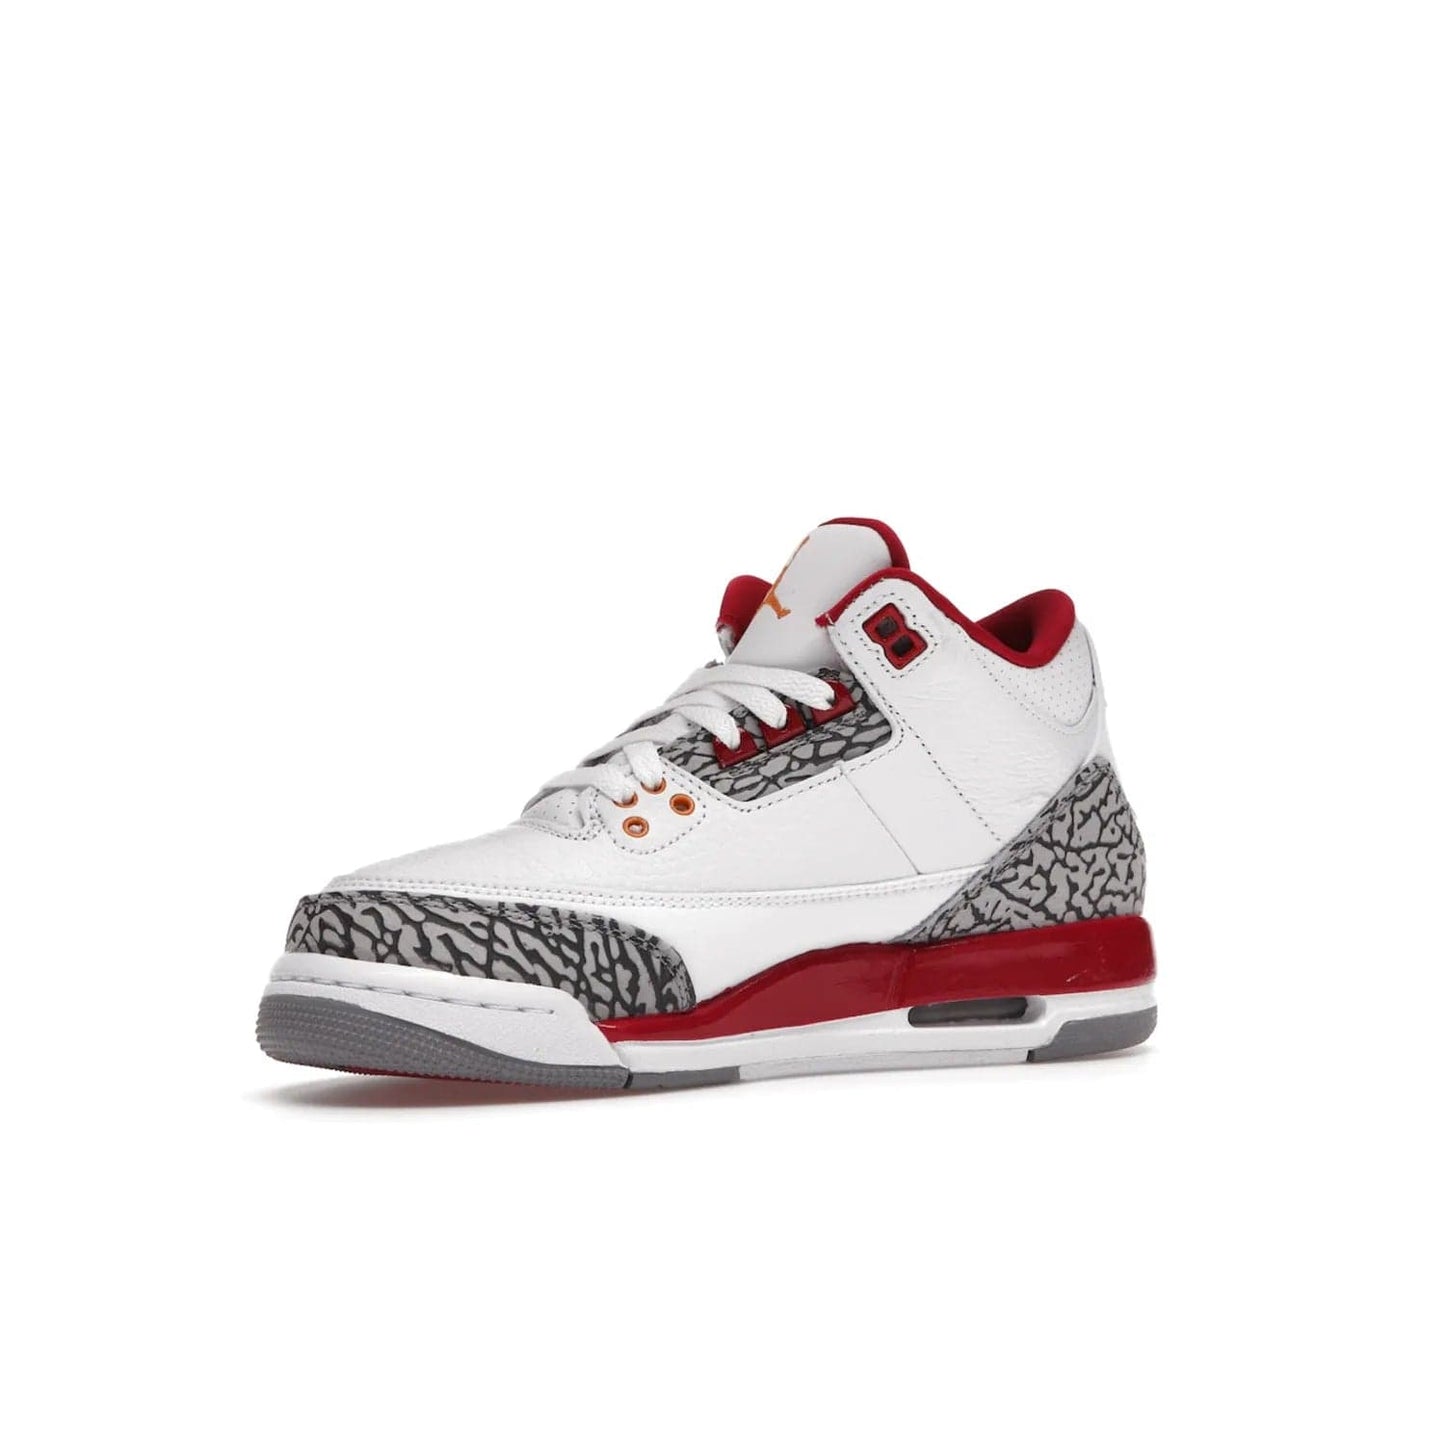 Jordan 3 Retro Cardinal (GS) - Image 16 - Only at www.BallersClubKickz.com - Shop the kid-sized Air Jordan 3 Retro Cardinal GS, released Feb 2022. White tumbled leather upper, light curry accenting, cement grey and classic red details throughout. Visible Air cushioning, midsole, and an eye-catching outsole. Show off your style with this fashionable streetwear silhouette.